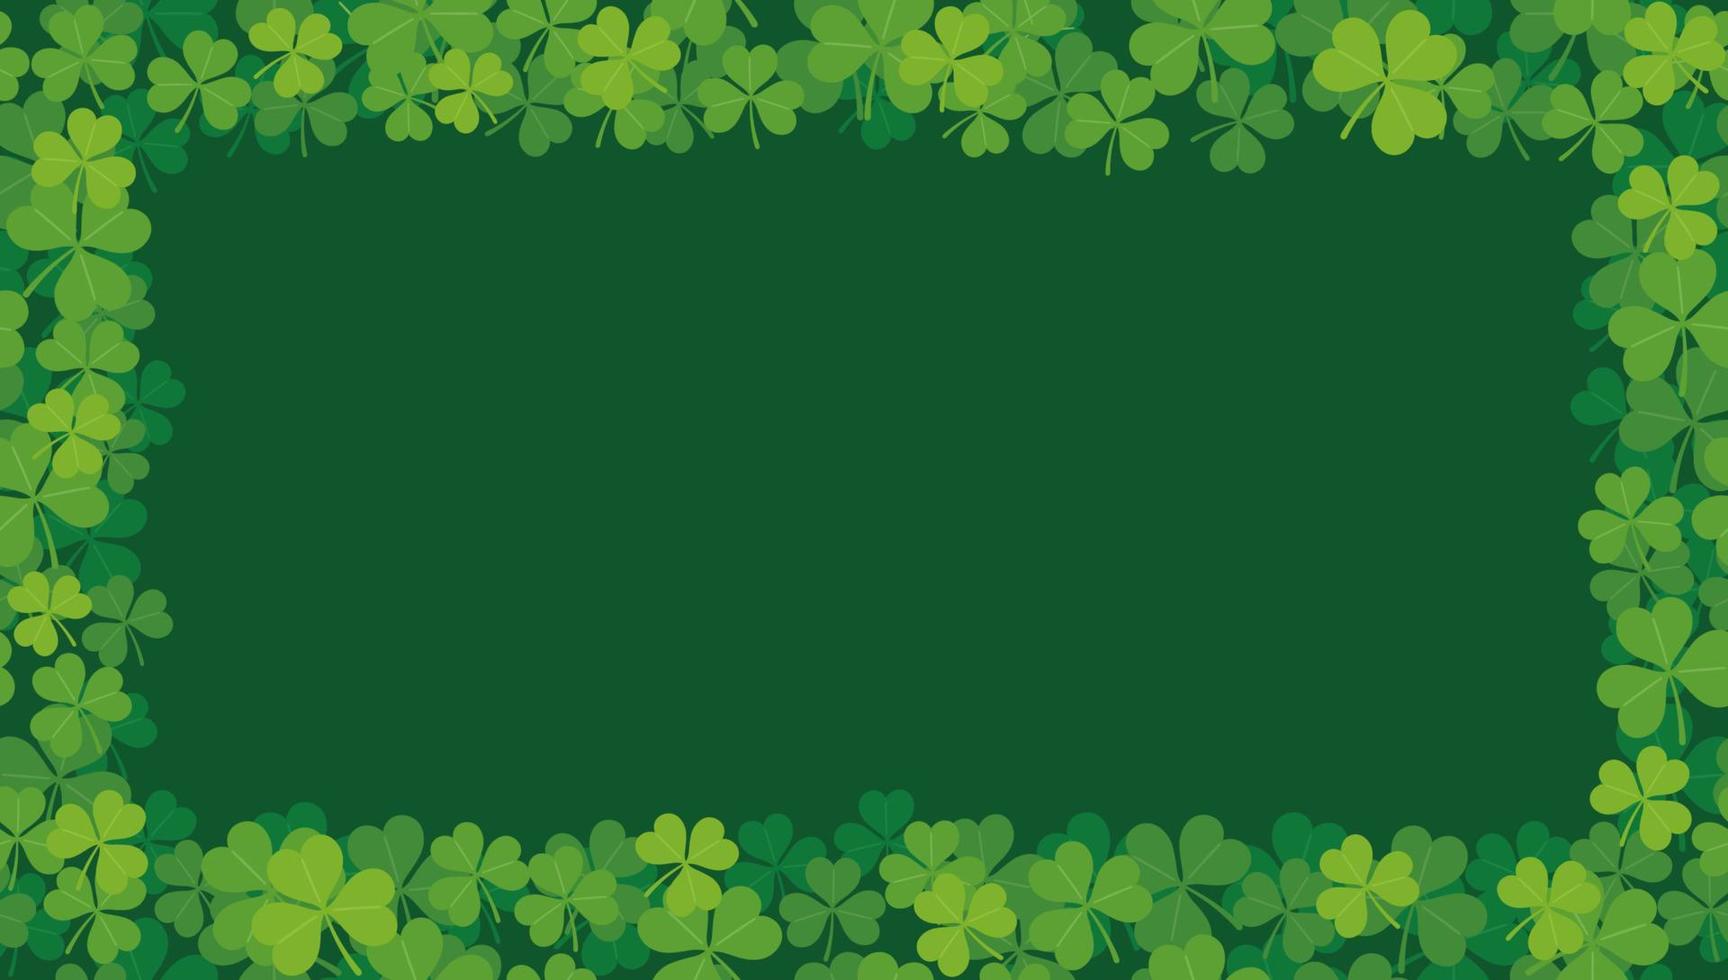 Horizontally And Vertically Repeatable Seamless Vector Clover Frame Illustration For St. Patricks Day.